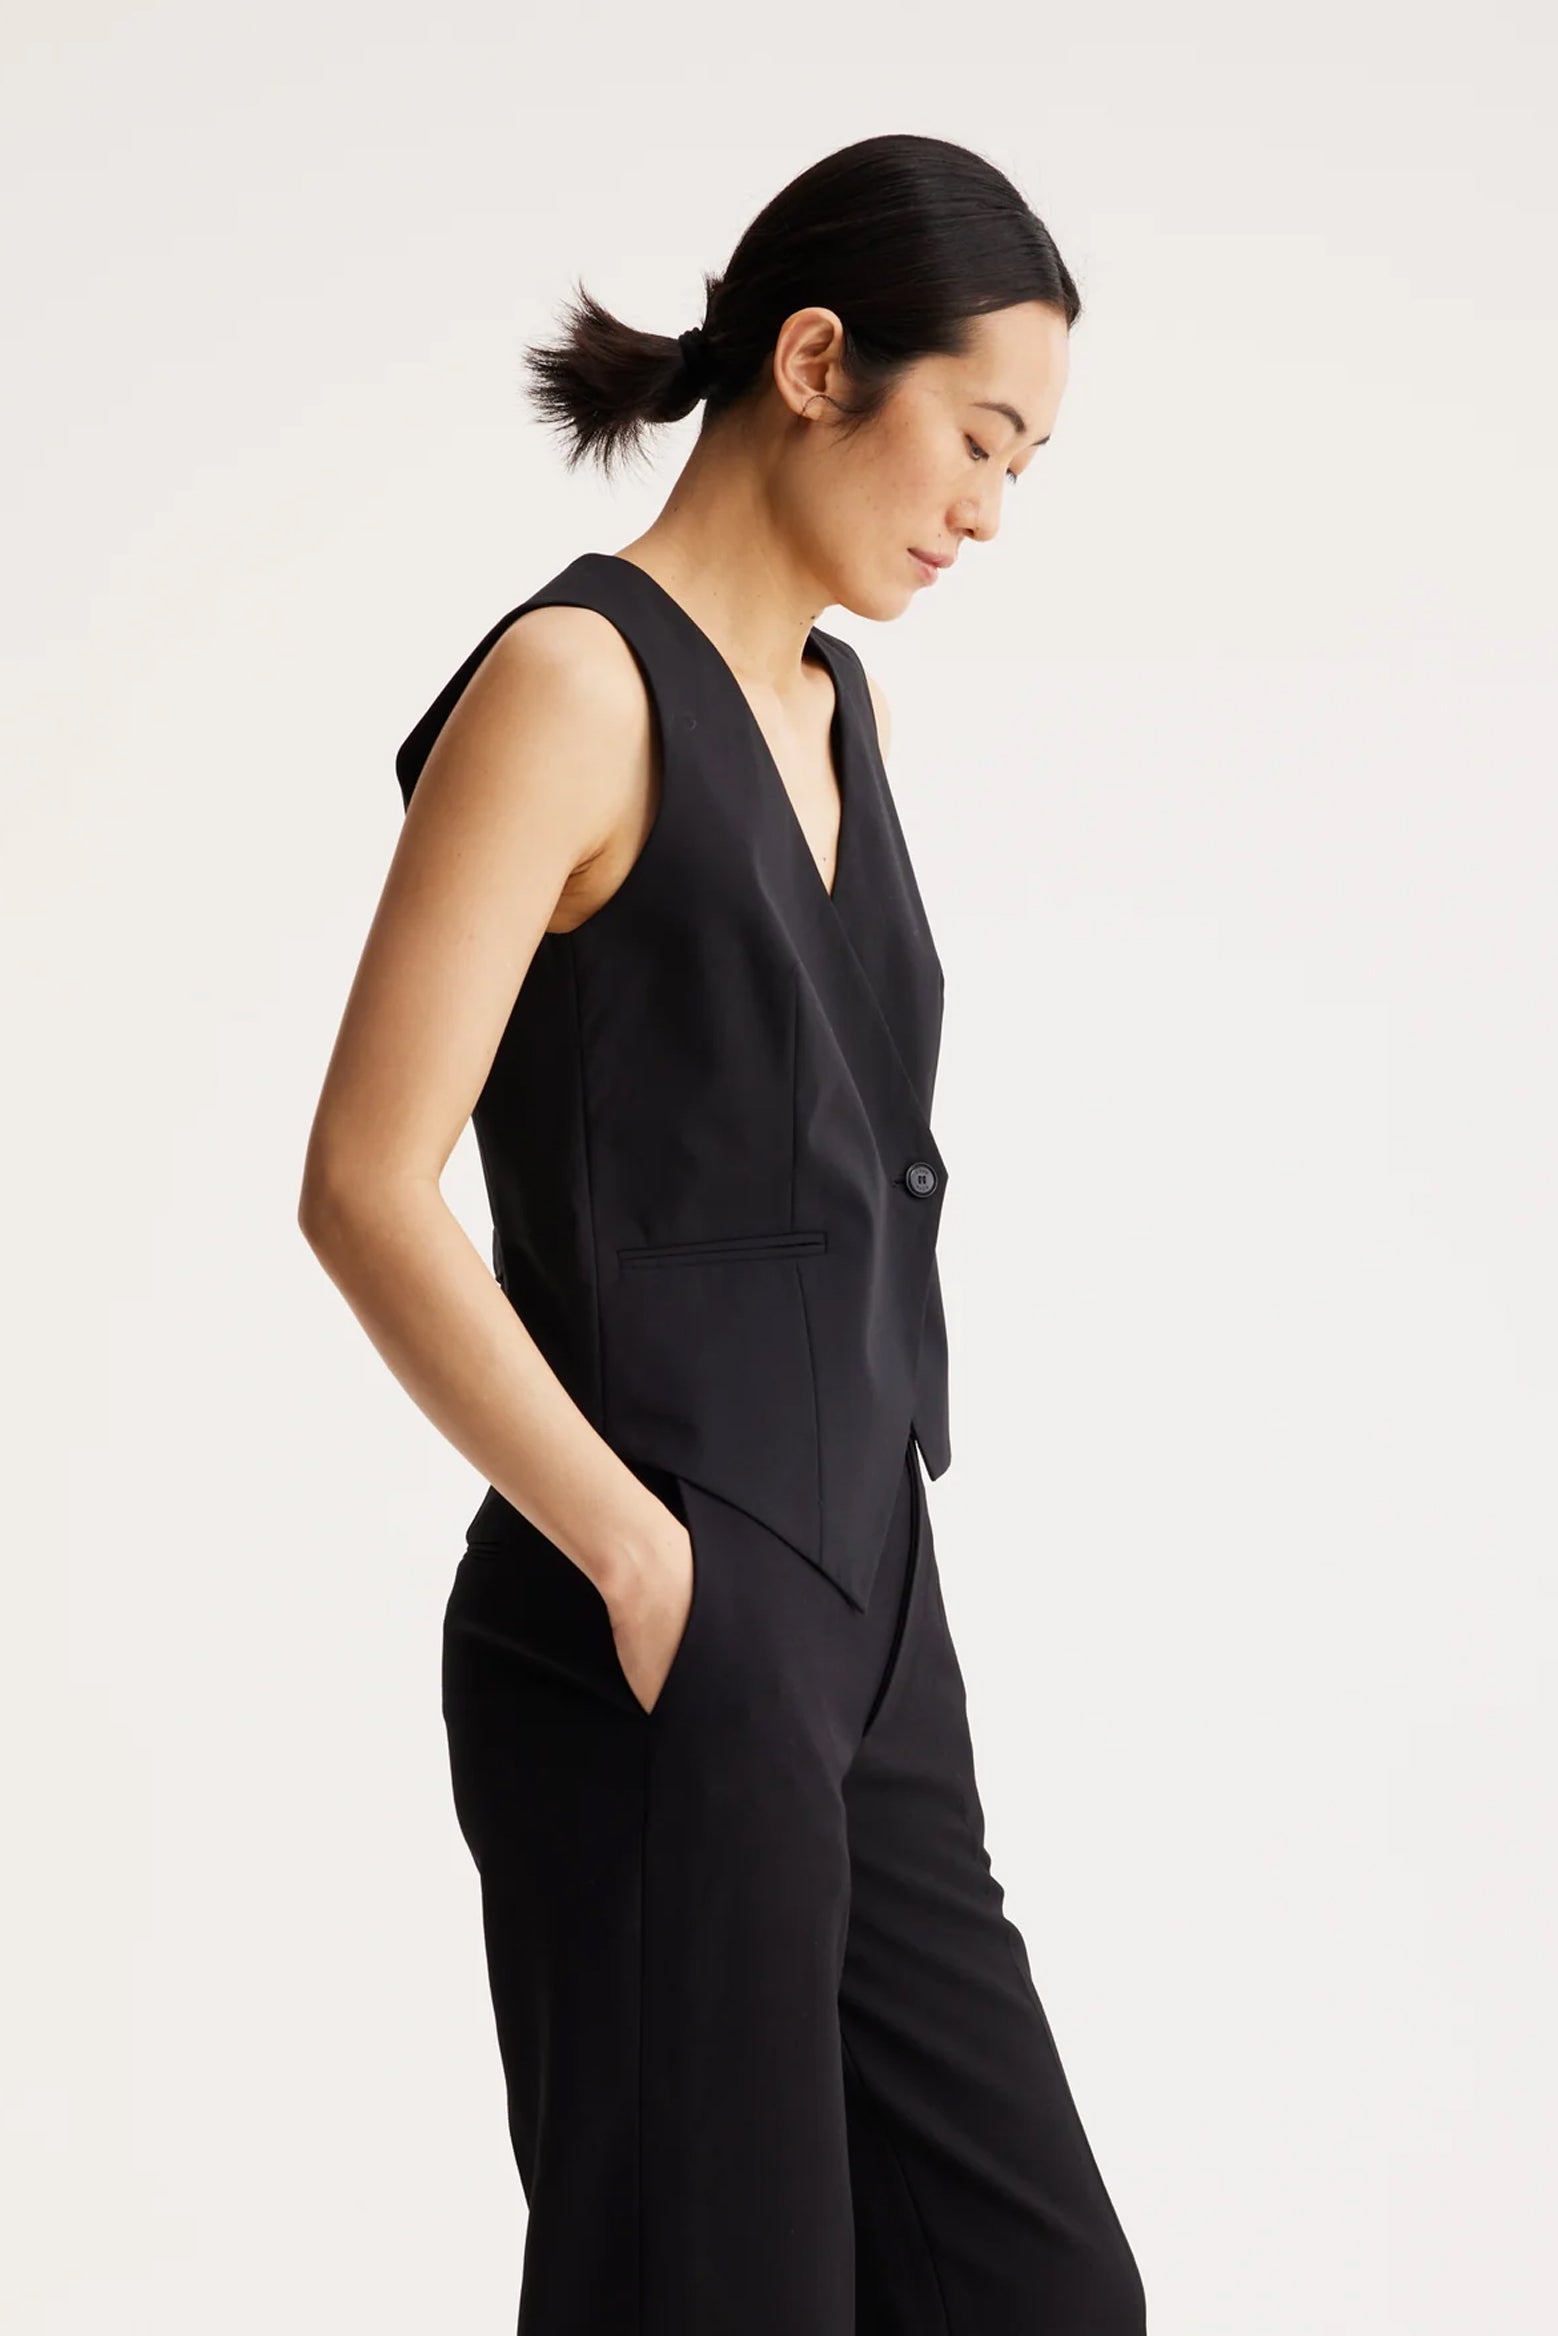 Rohe Tailored Overlap Waistcoat in Noir available at The New Trend Australia.